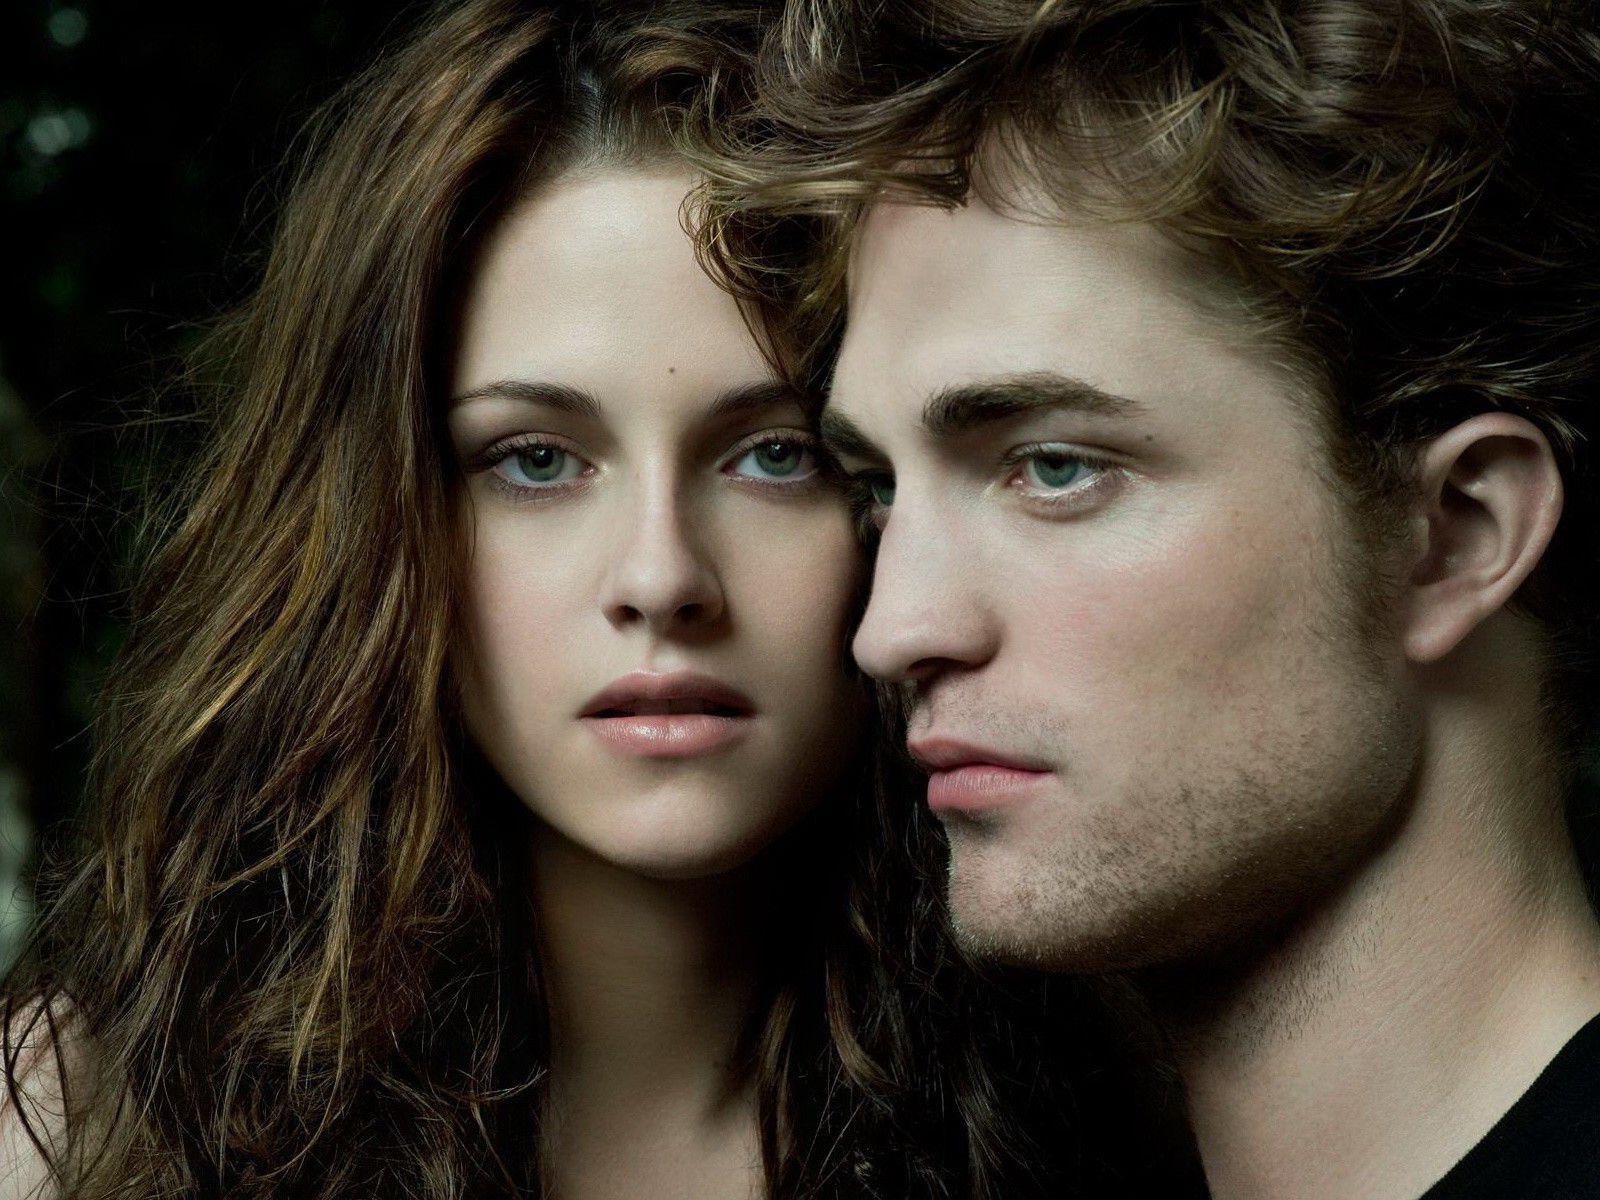 A Love Scene From The Twilight Saga. HD Hollywood Movies Wallpaper